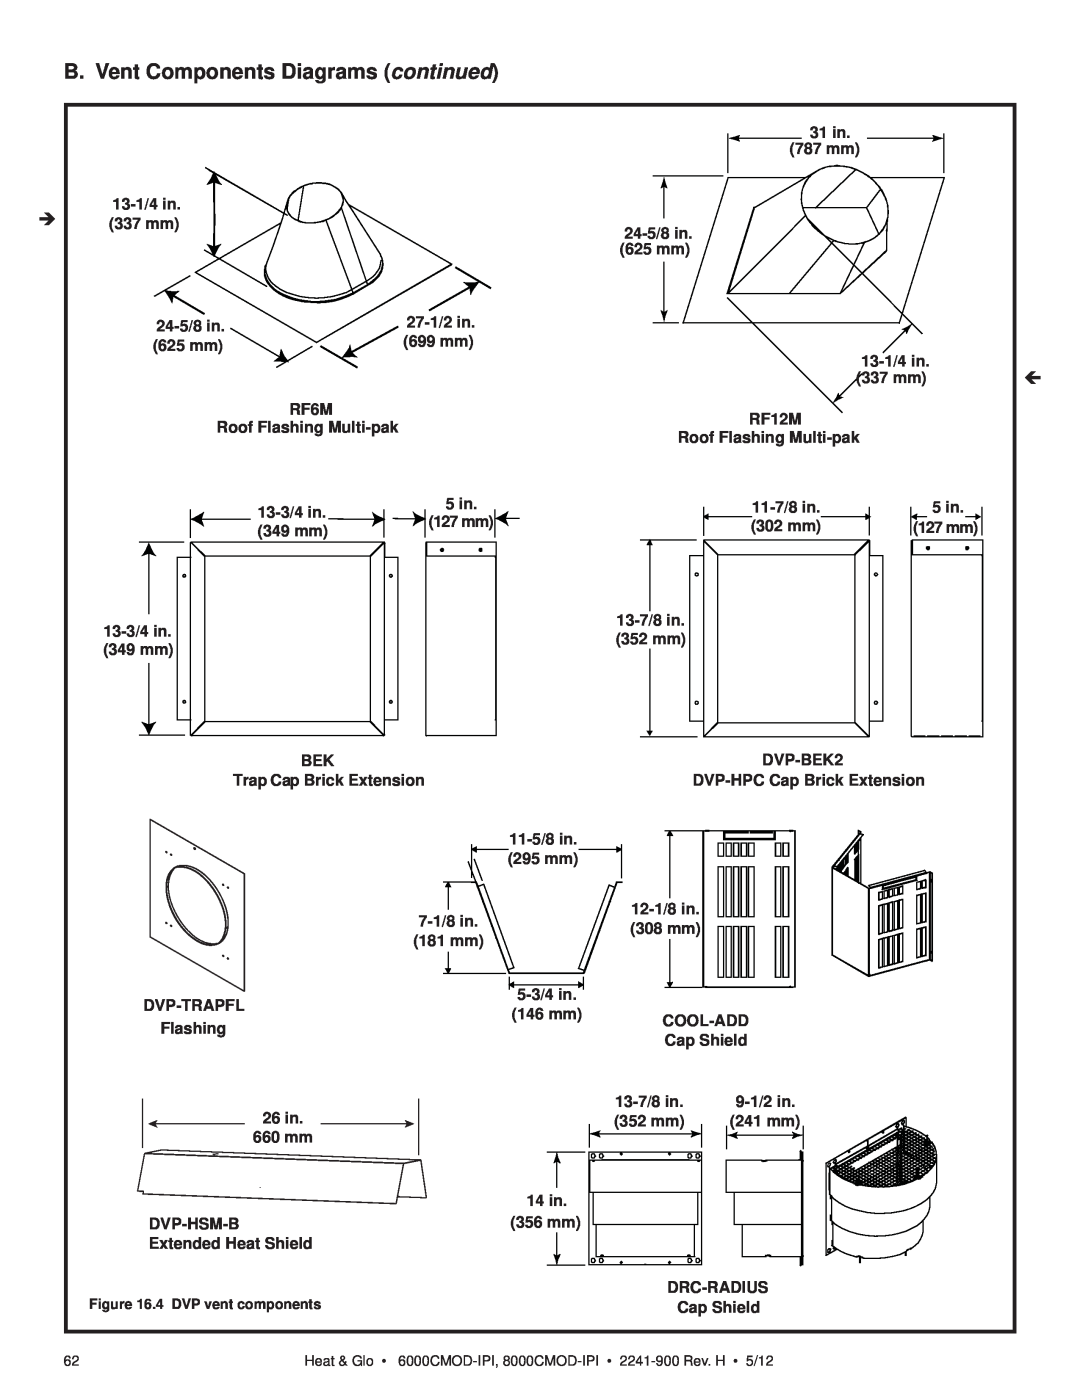 Heat & Glo LifeStyle 8000CMOD-IPI B. Vent Components Diagrams continued, 31 in, 787 mm, 13-1/4in, 337 mm, 24-5/8in, 625 mm 